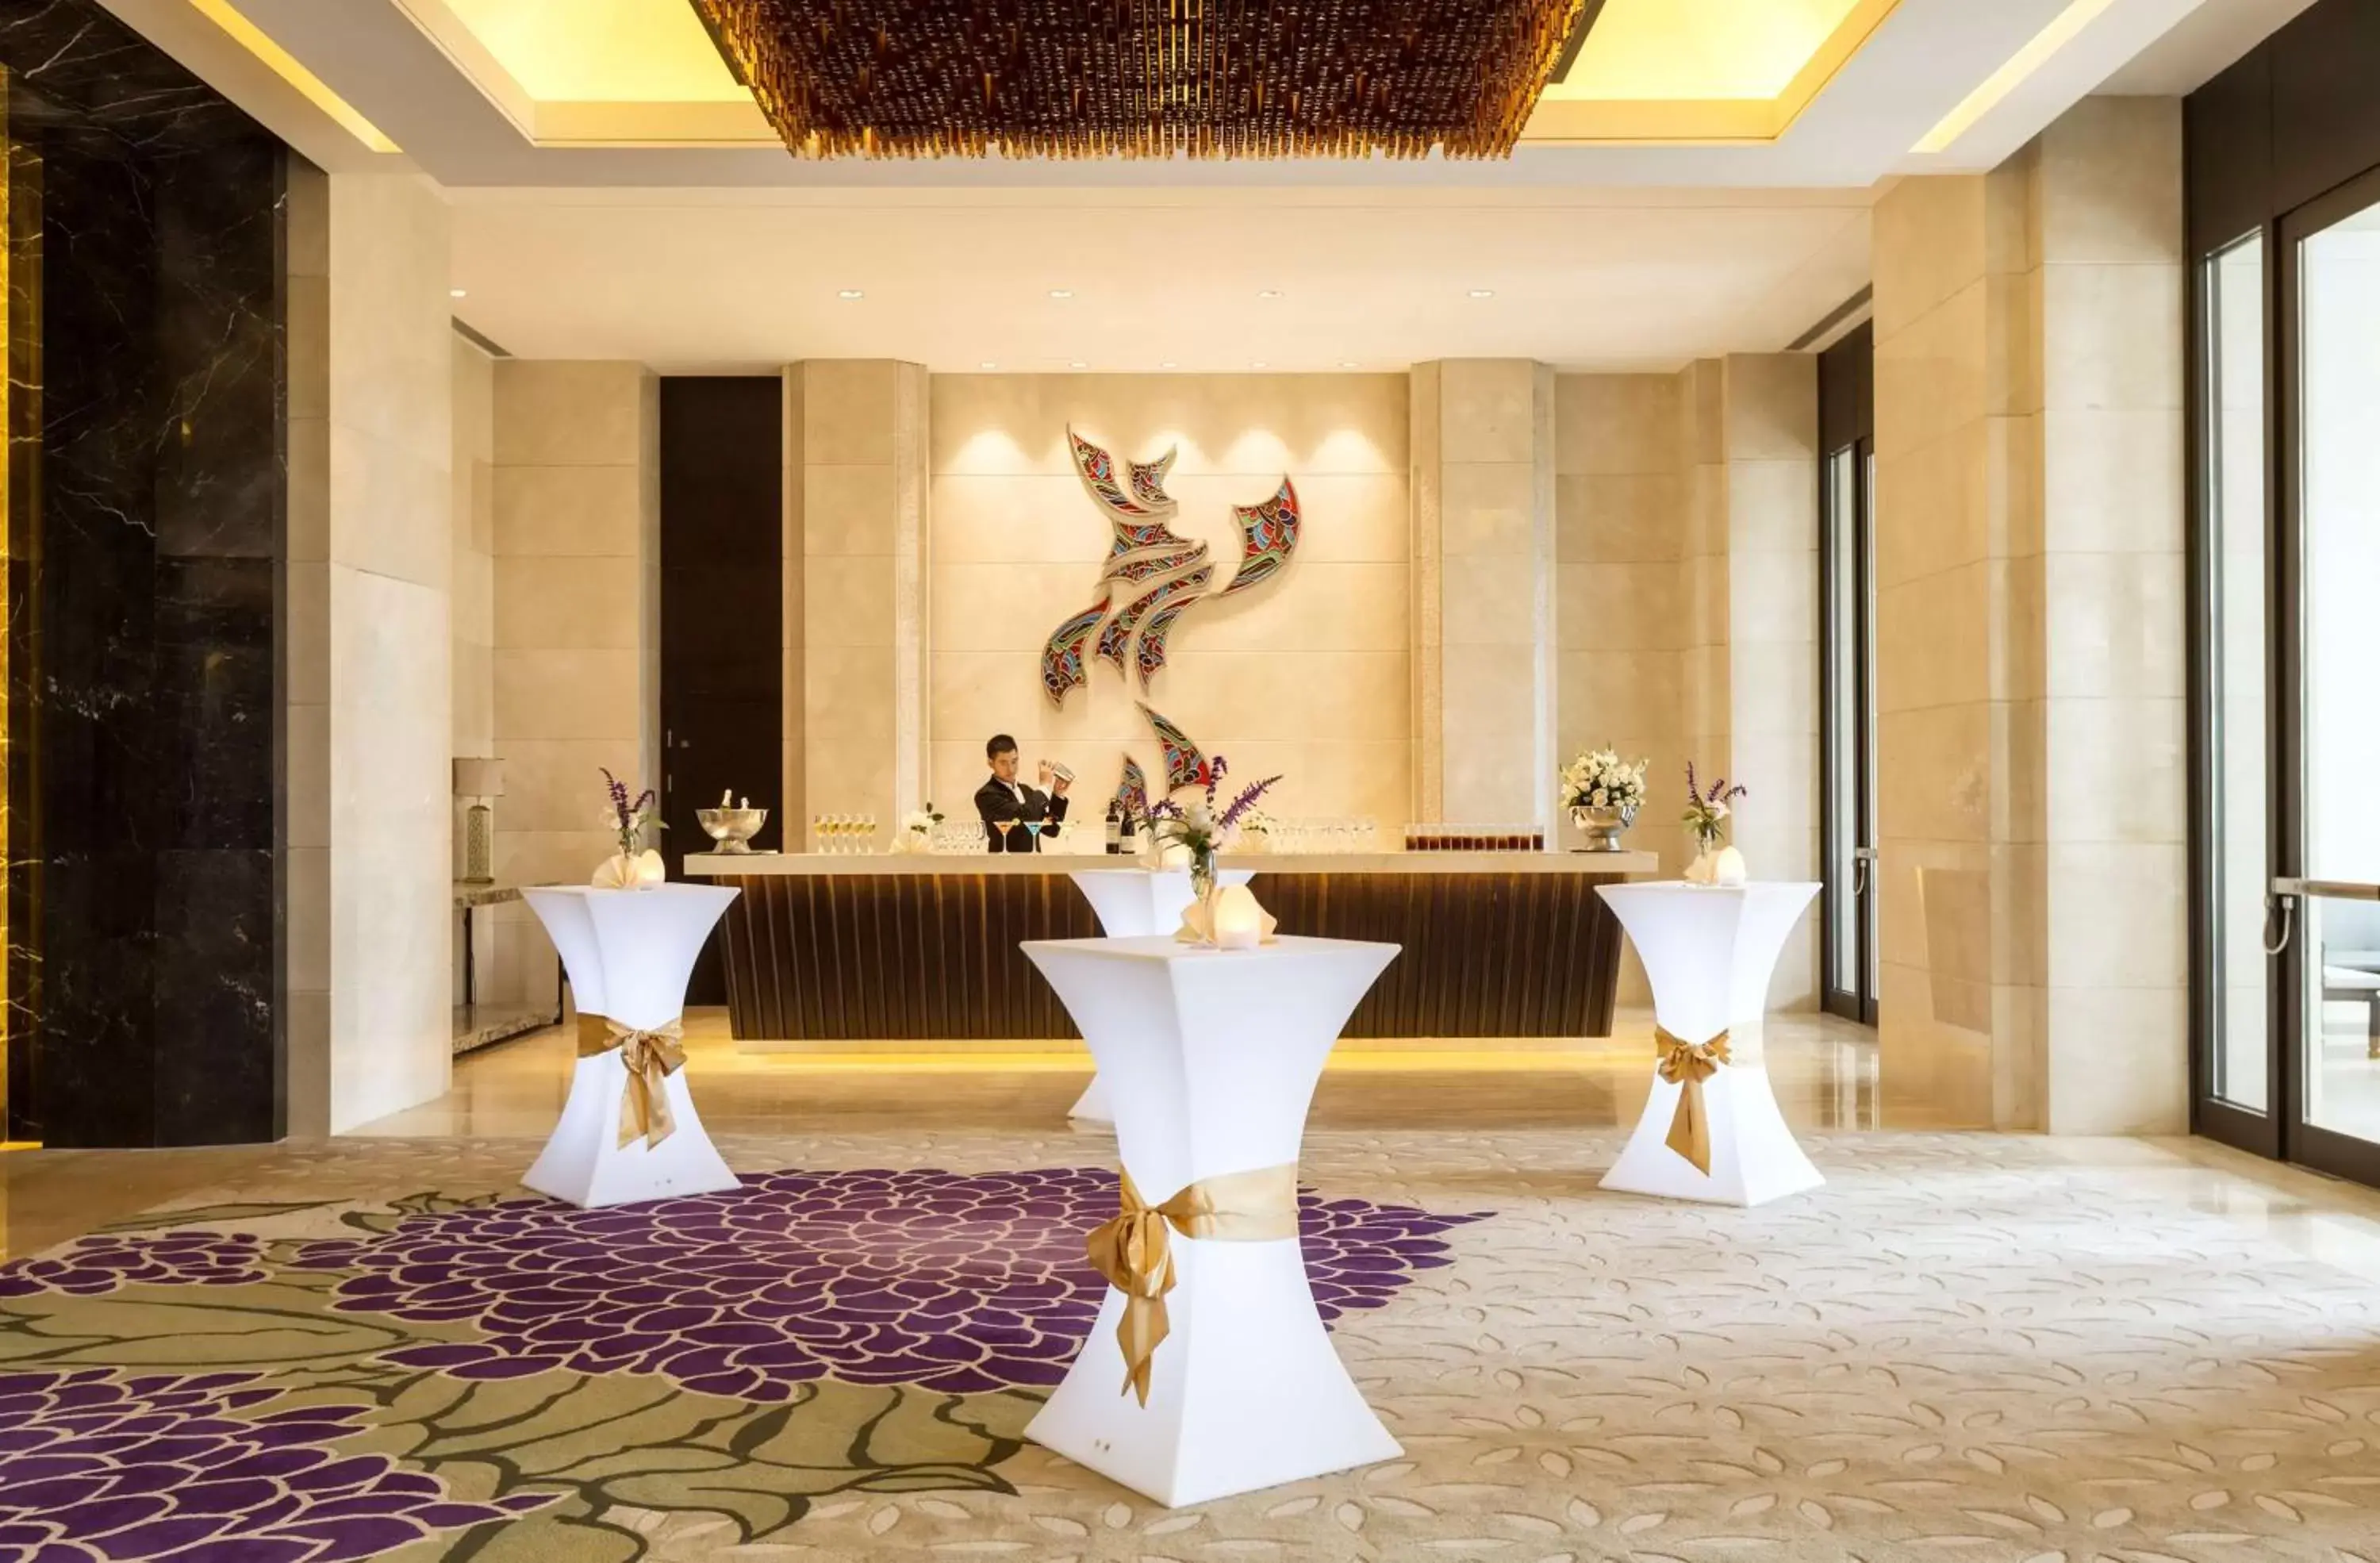 Meeting/conference room, Banquet Facilities in Hilton Dali Resort & Spa